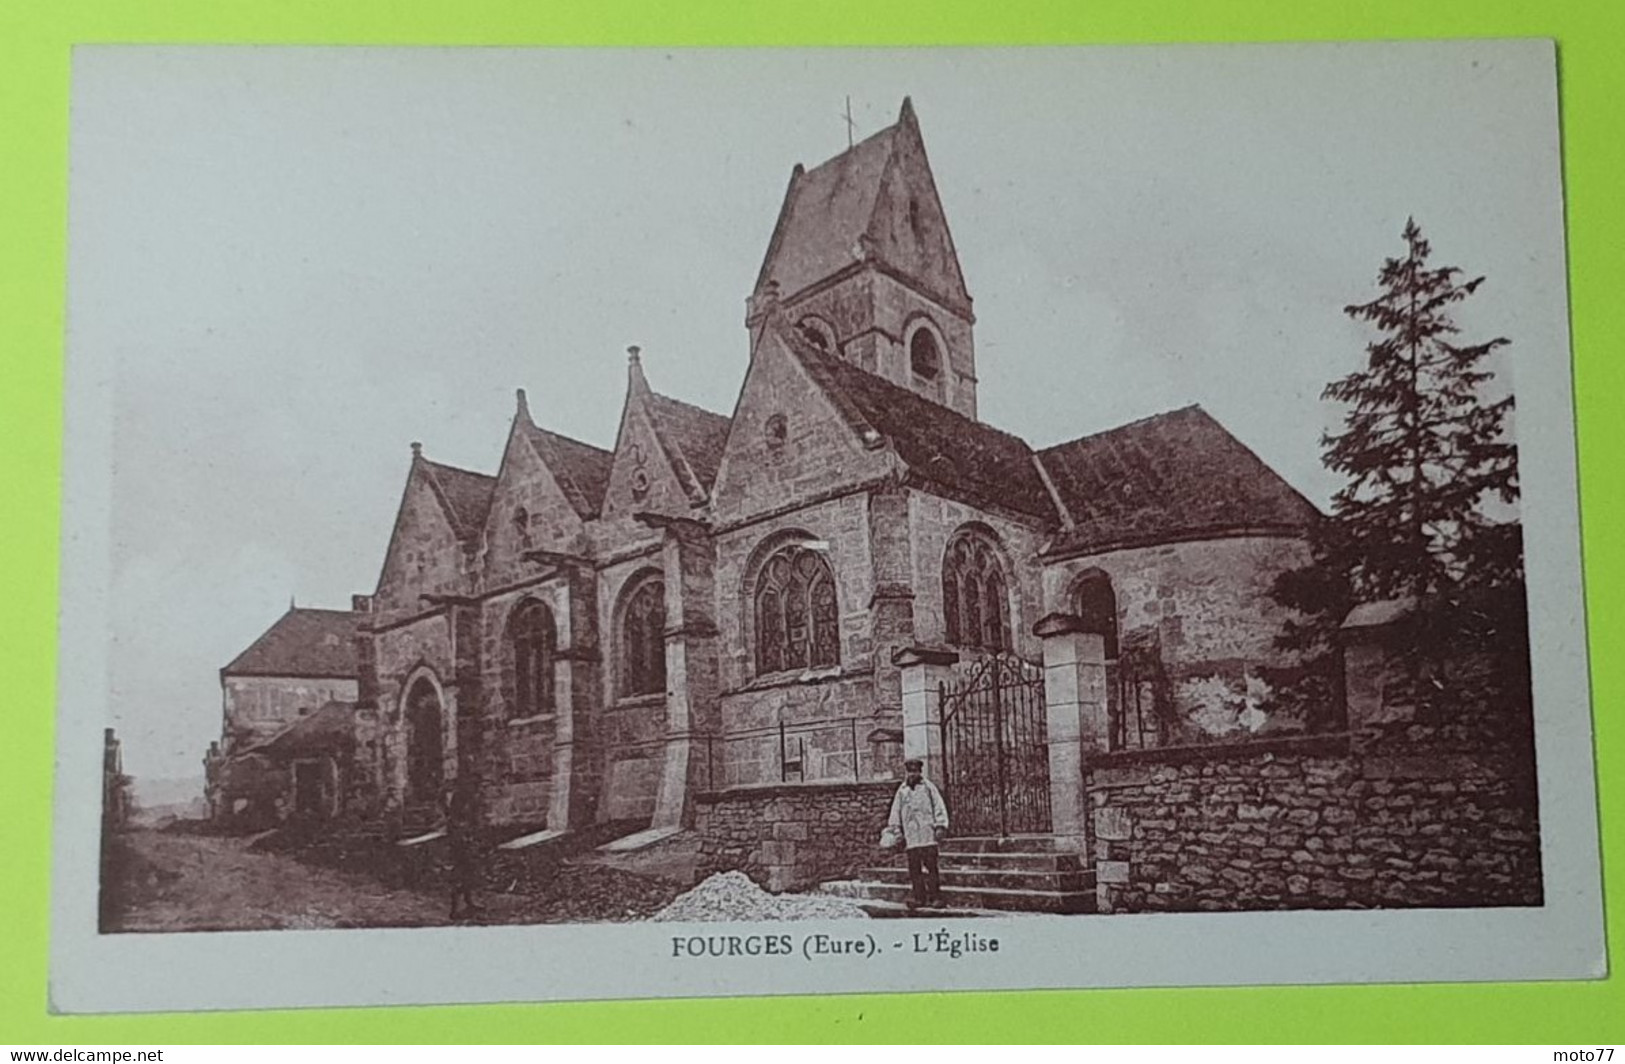 27 / EURE - Fourges - Eglise - CPA Carte Postale Ancienne - Vers 1930 - Fourges